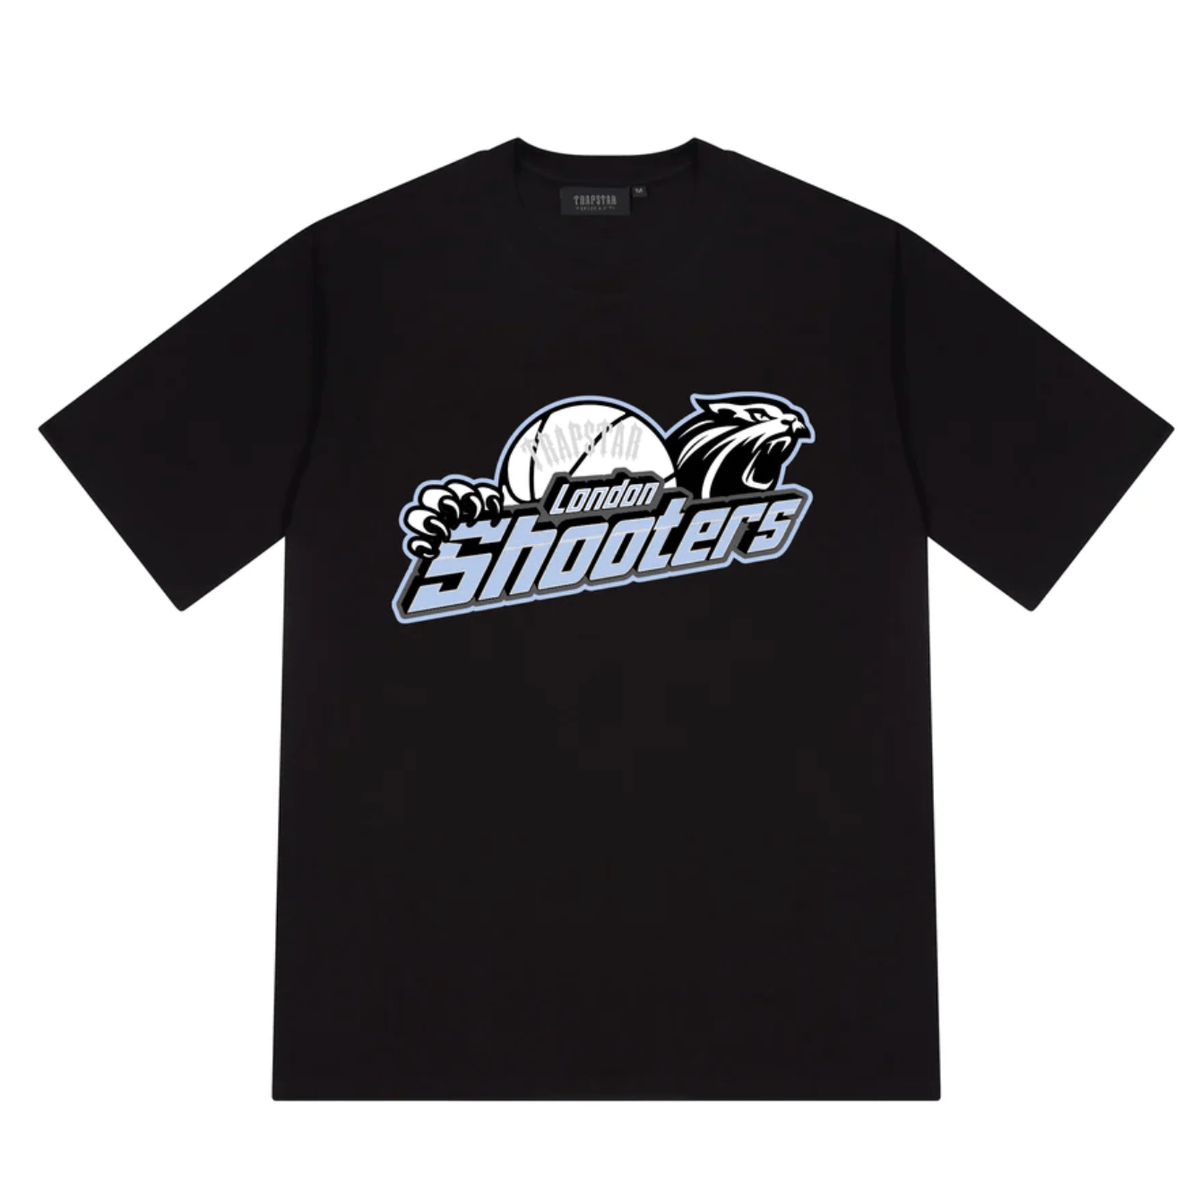 Trapstar Shooters SS23 T-Shirt - Black/Ice Edition - No Sauce The Plug